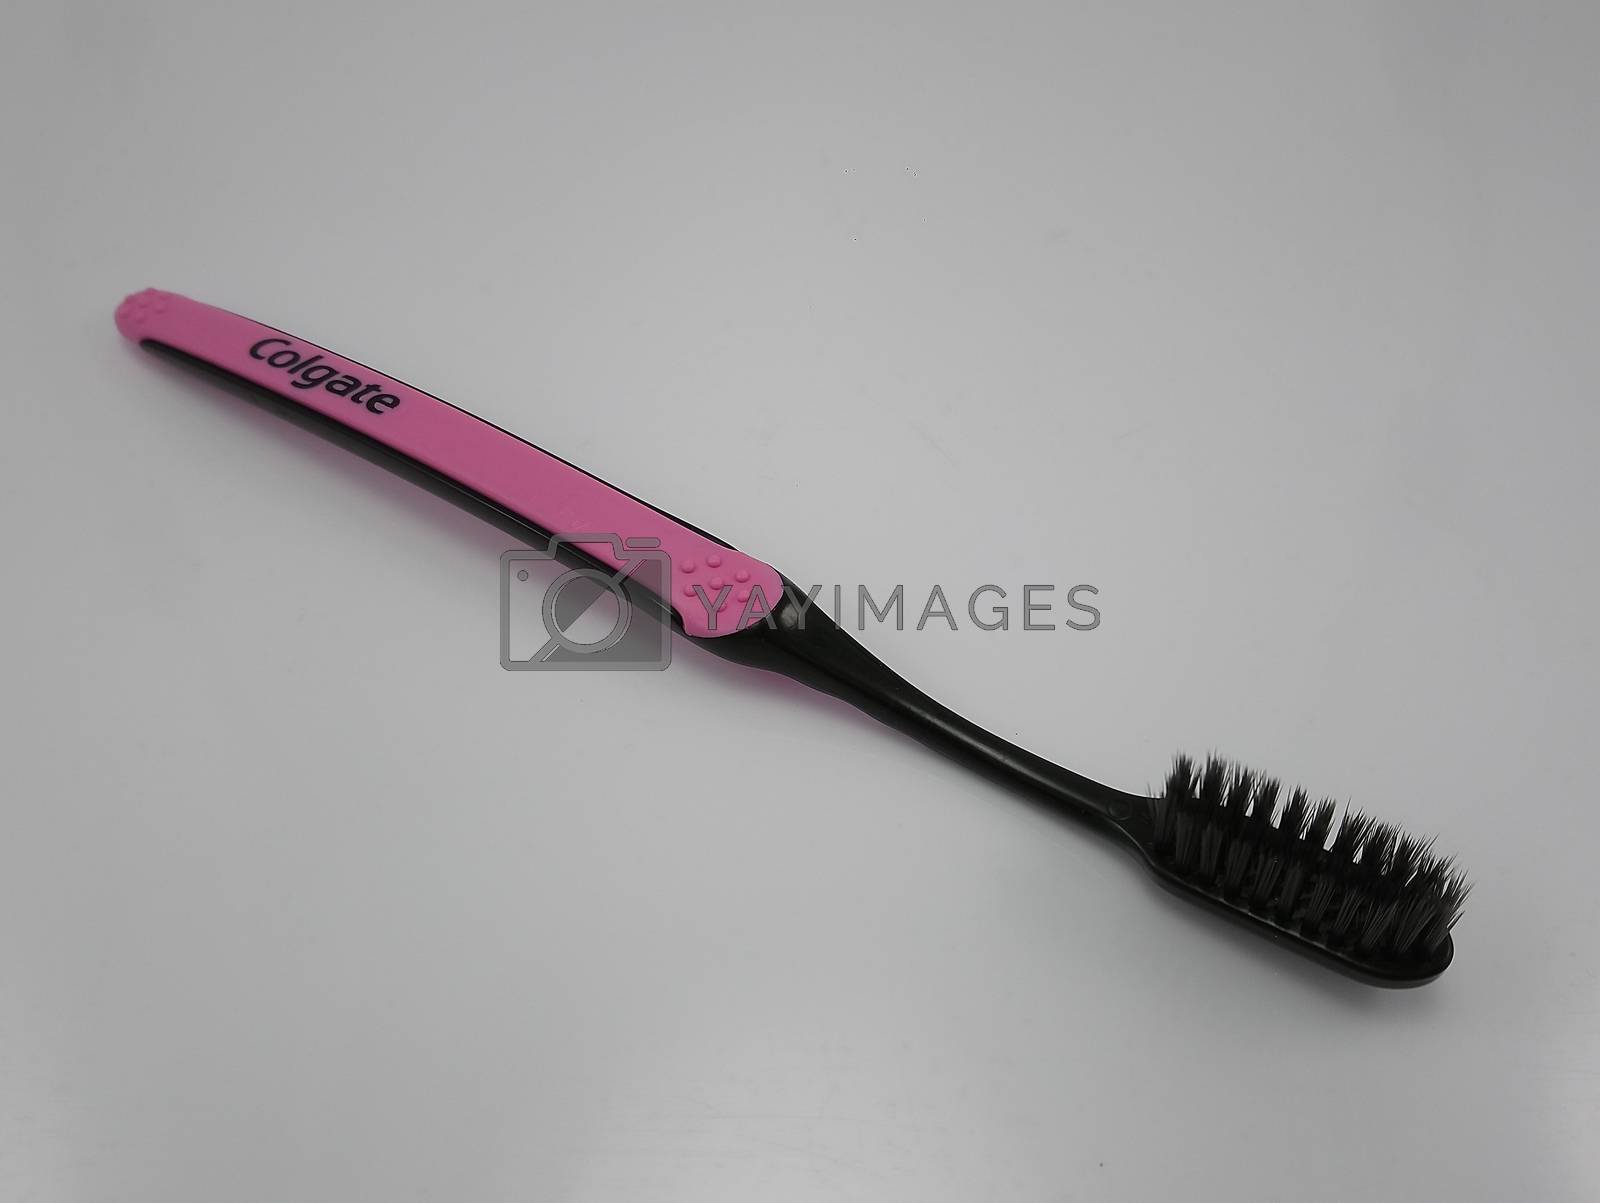 Royalty free image of Colgate pink toothbrush in the Philippines by imwaltersy